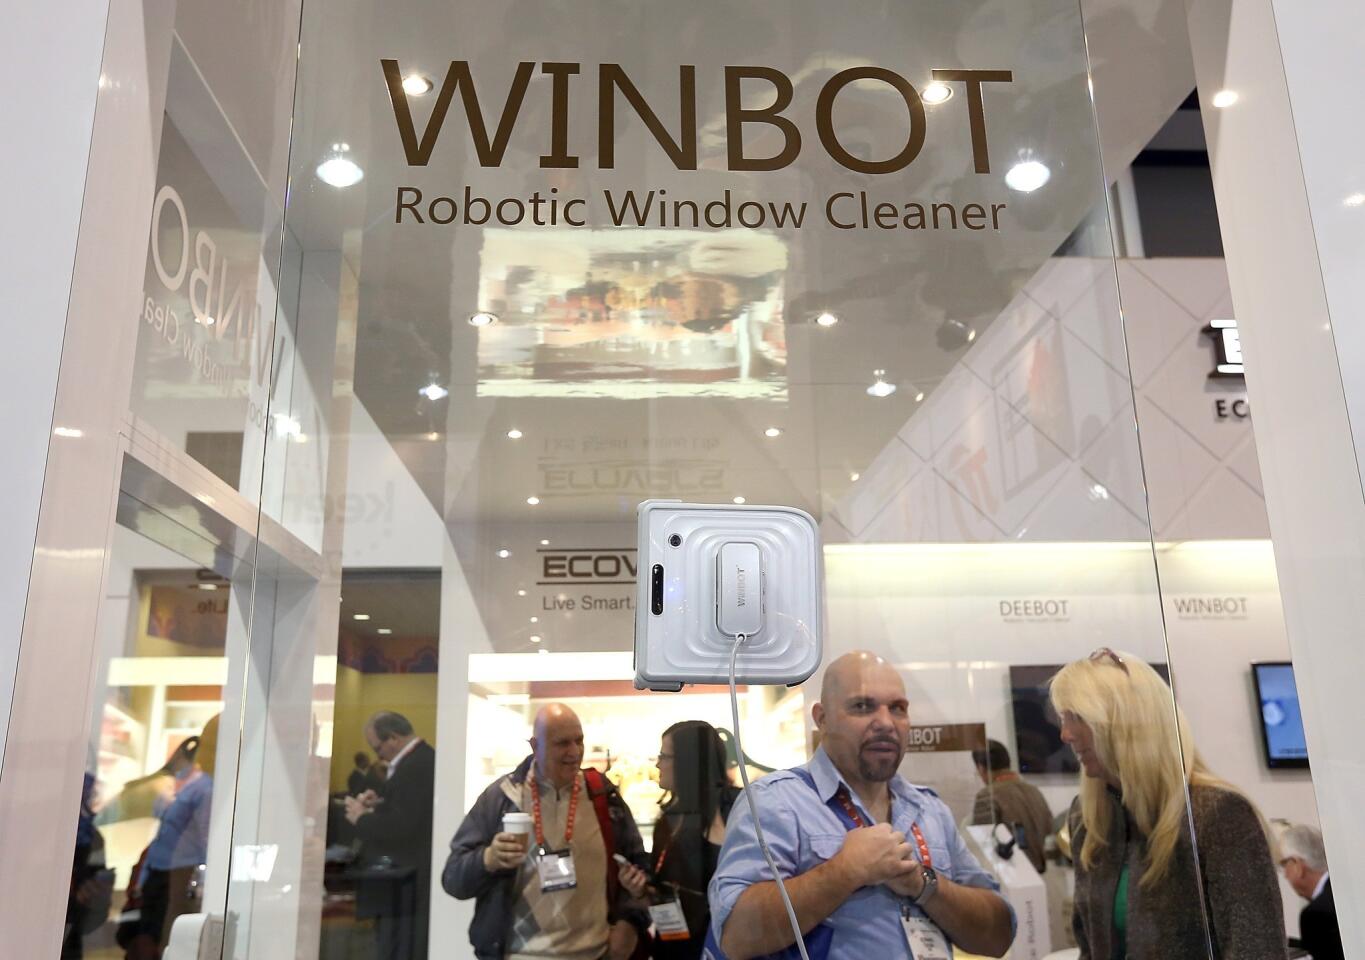 The Winbot